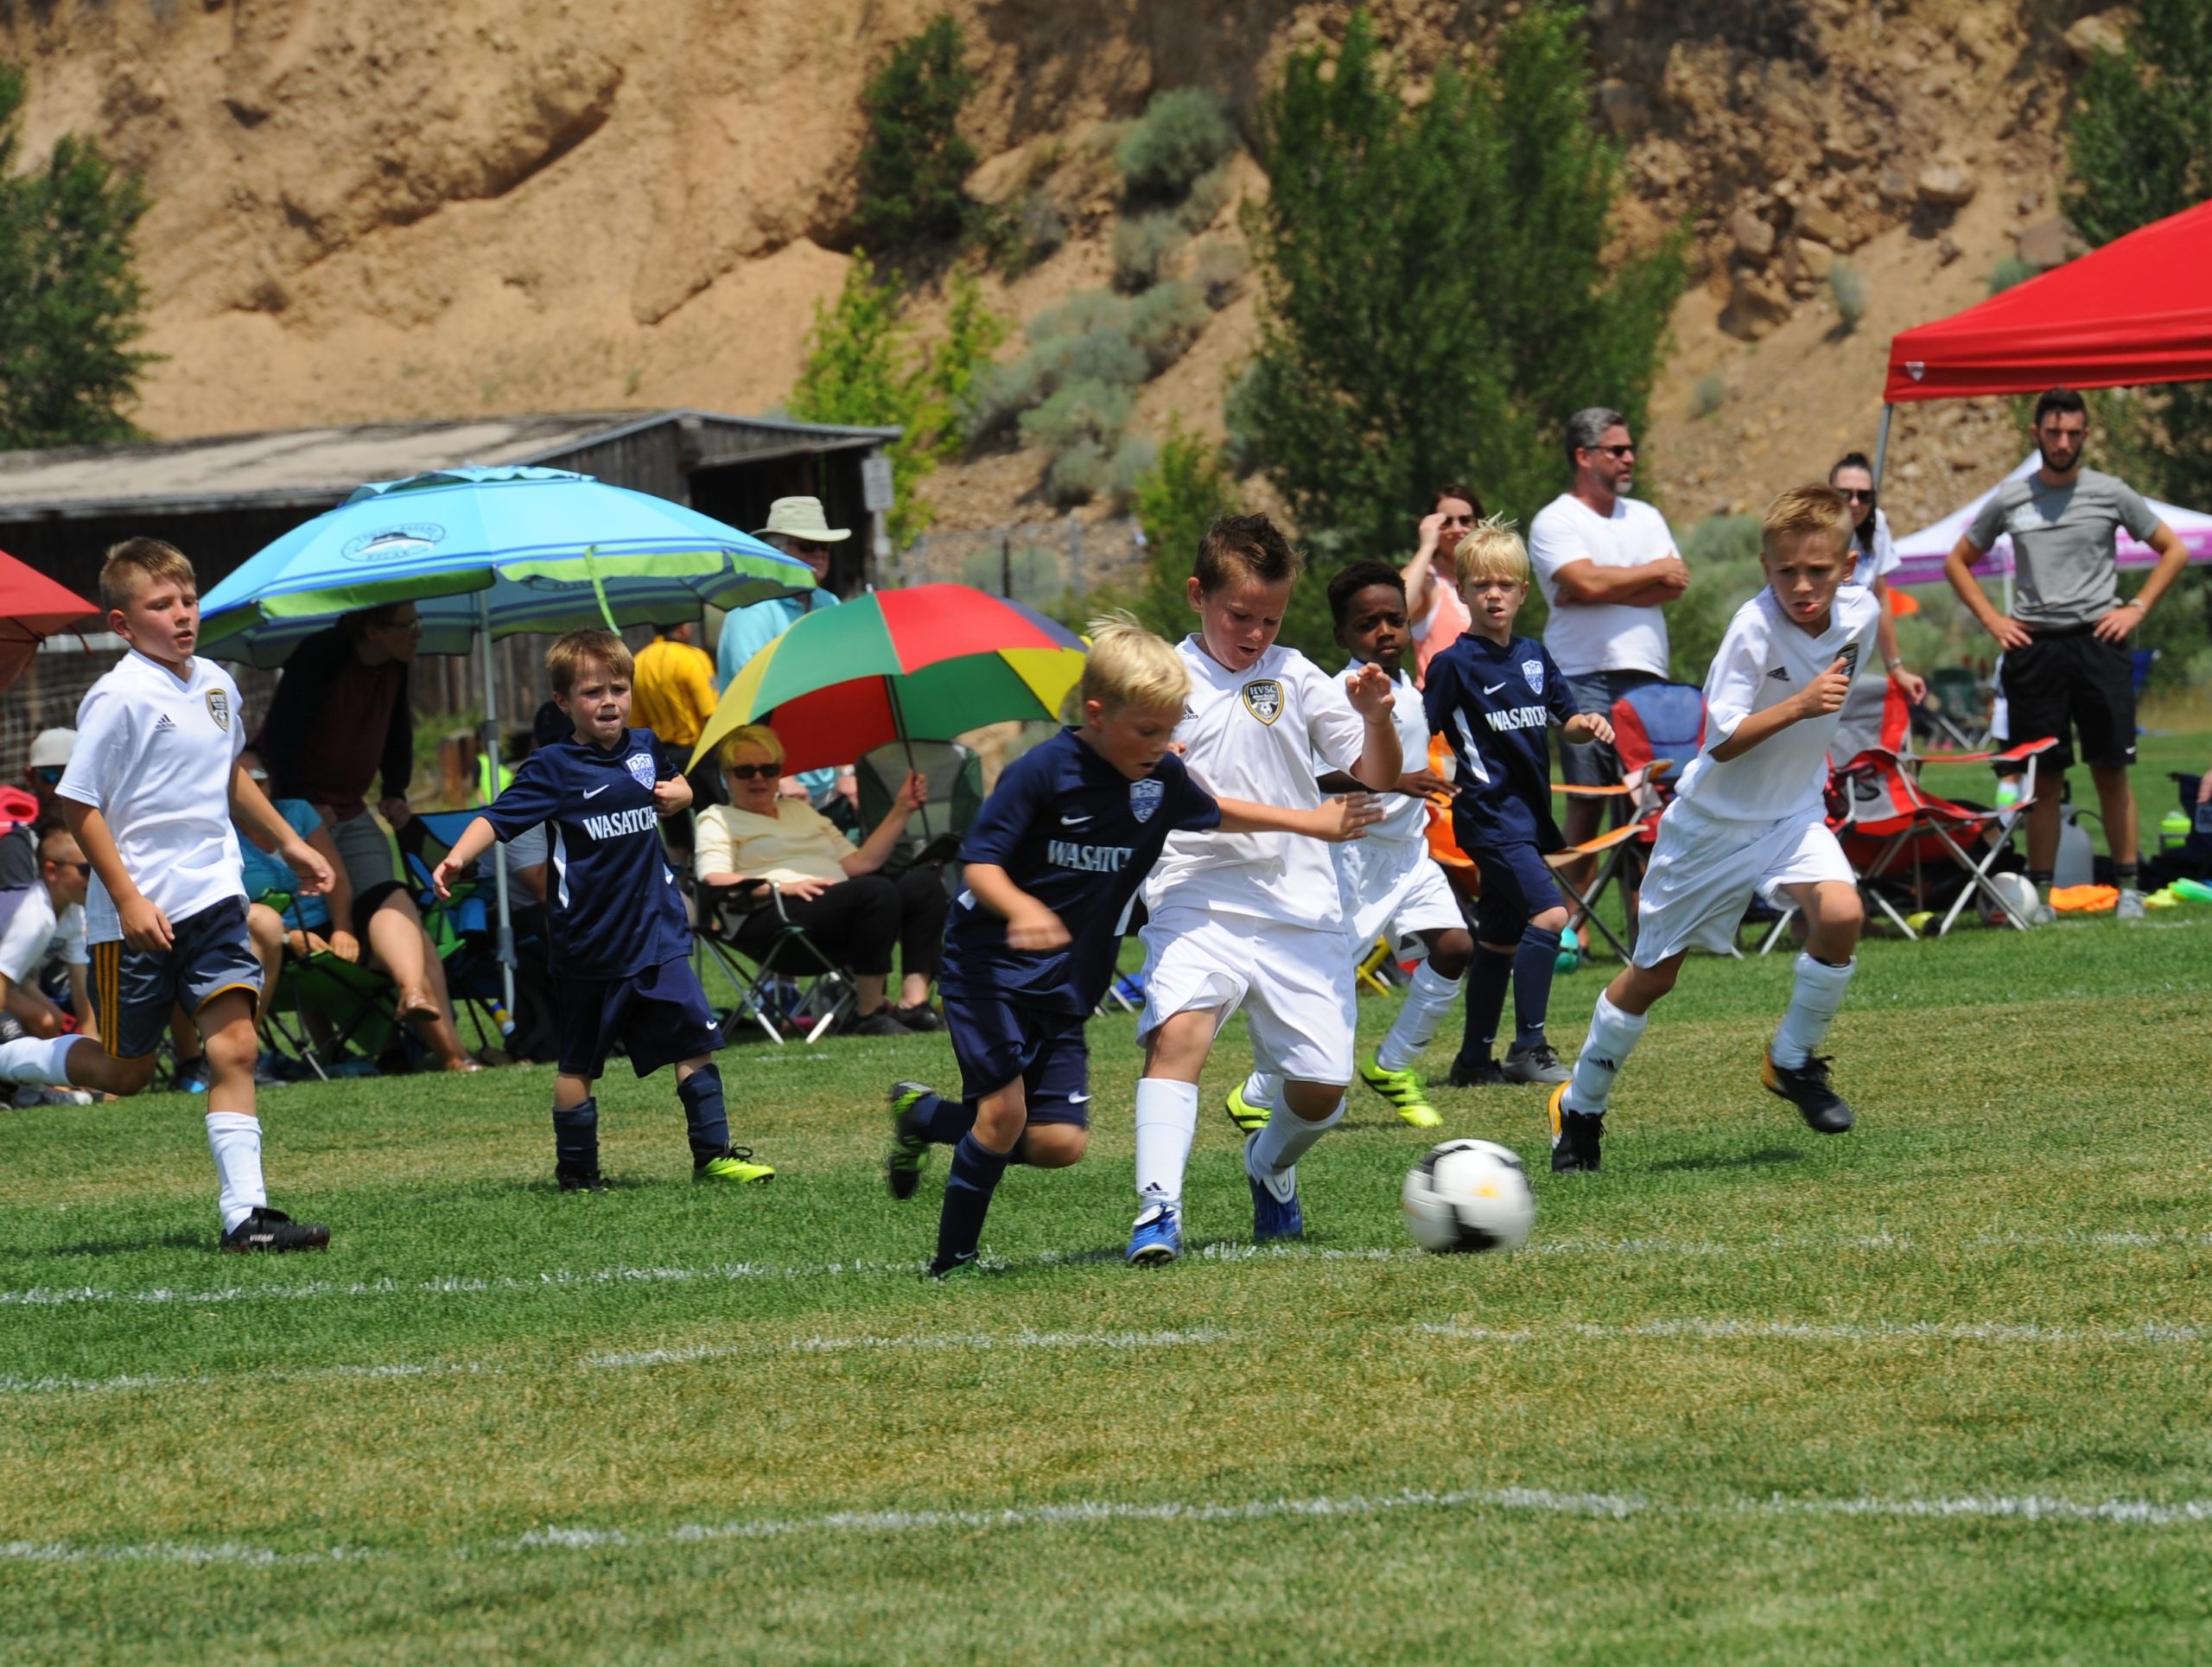 Park City Soccer Club hosts the extremely popular Extreme Cup